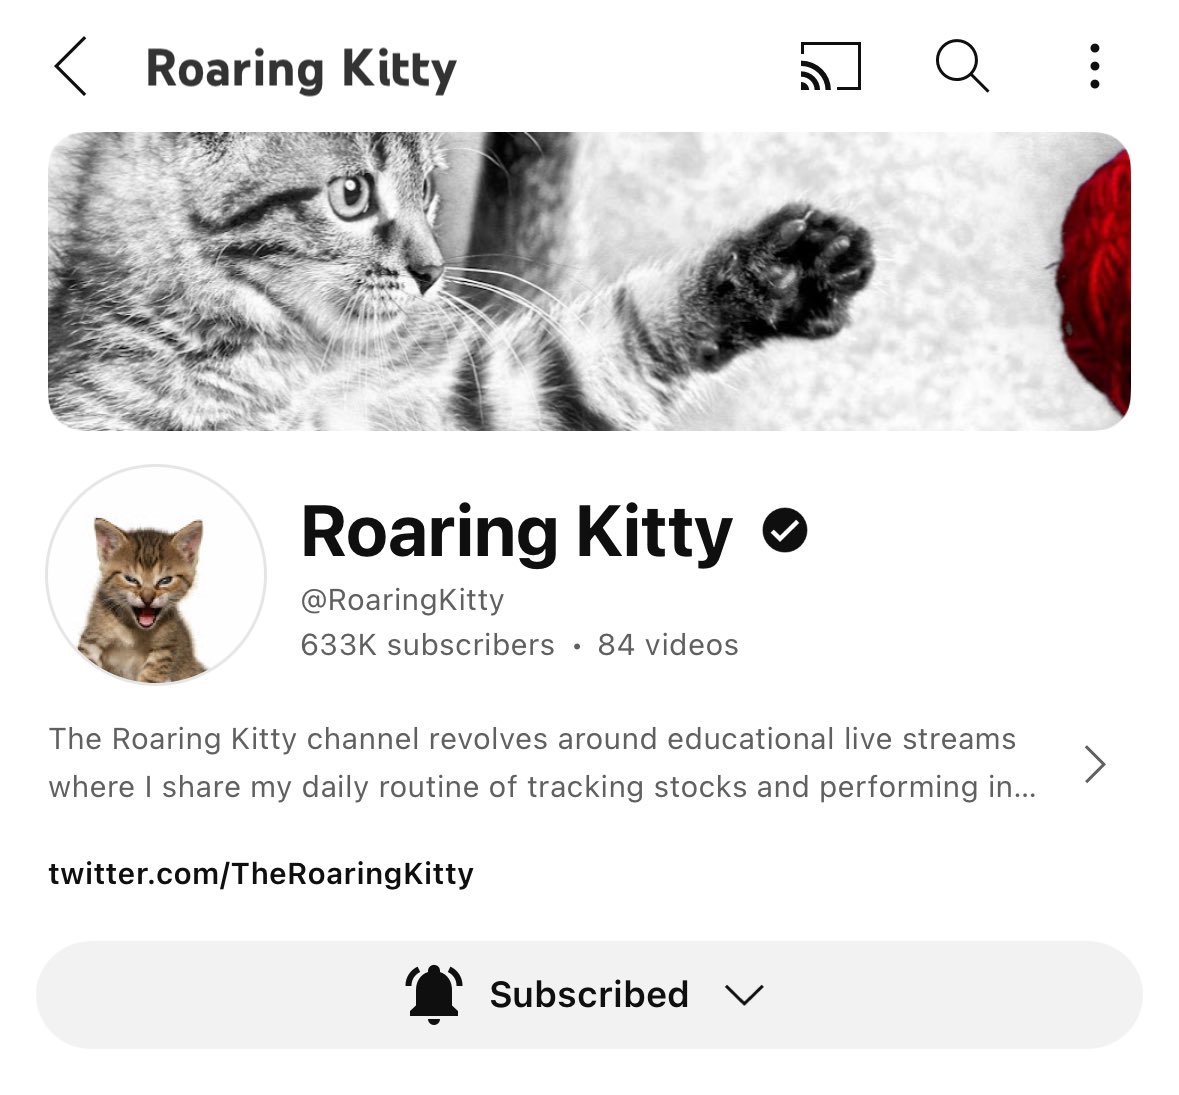 🚨🚨🚨 @TheRoaringKitty has updated his YouTube channel, not a drill! TikTok link has been removed! When live stream??? 😤😤😤